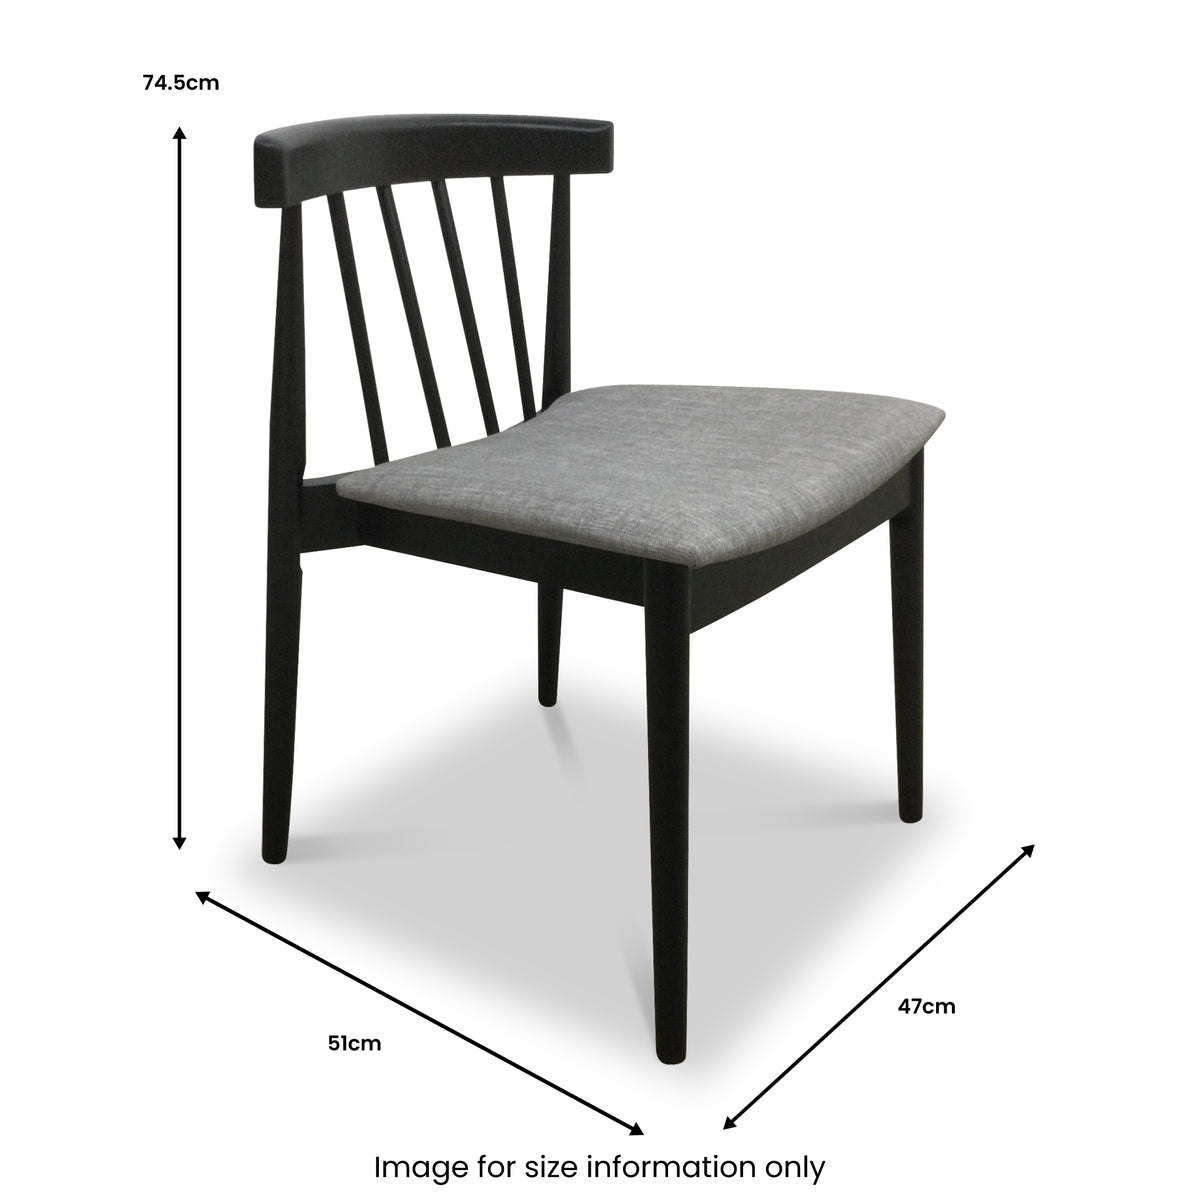 Jackson Dining Chair with Black Frame dimensions